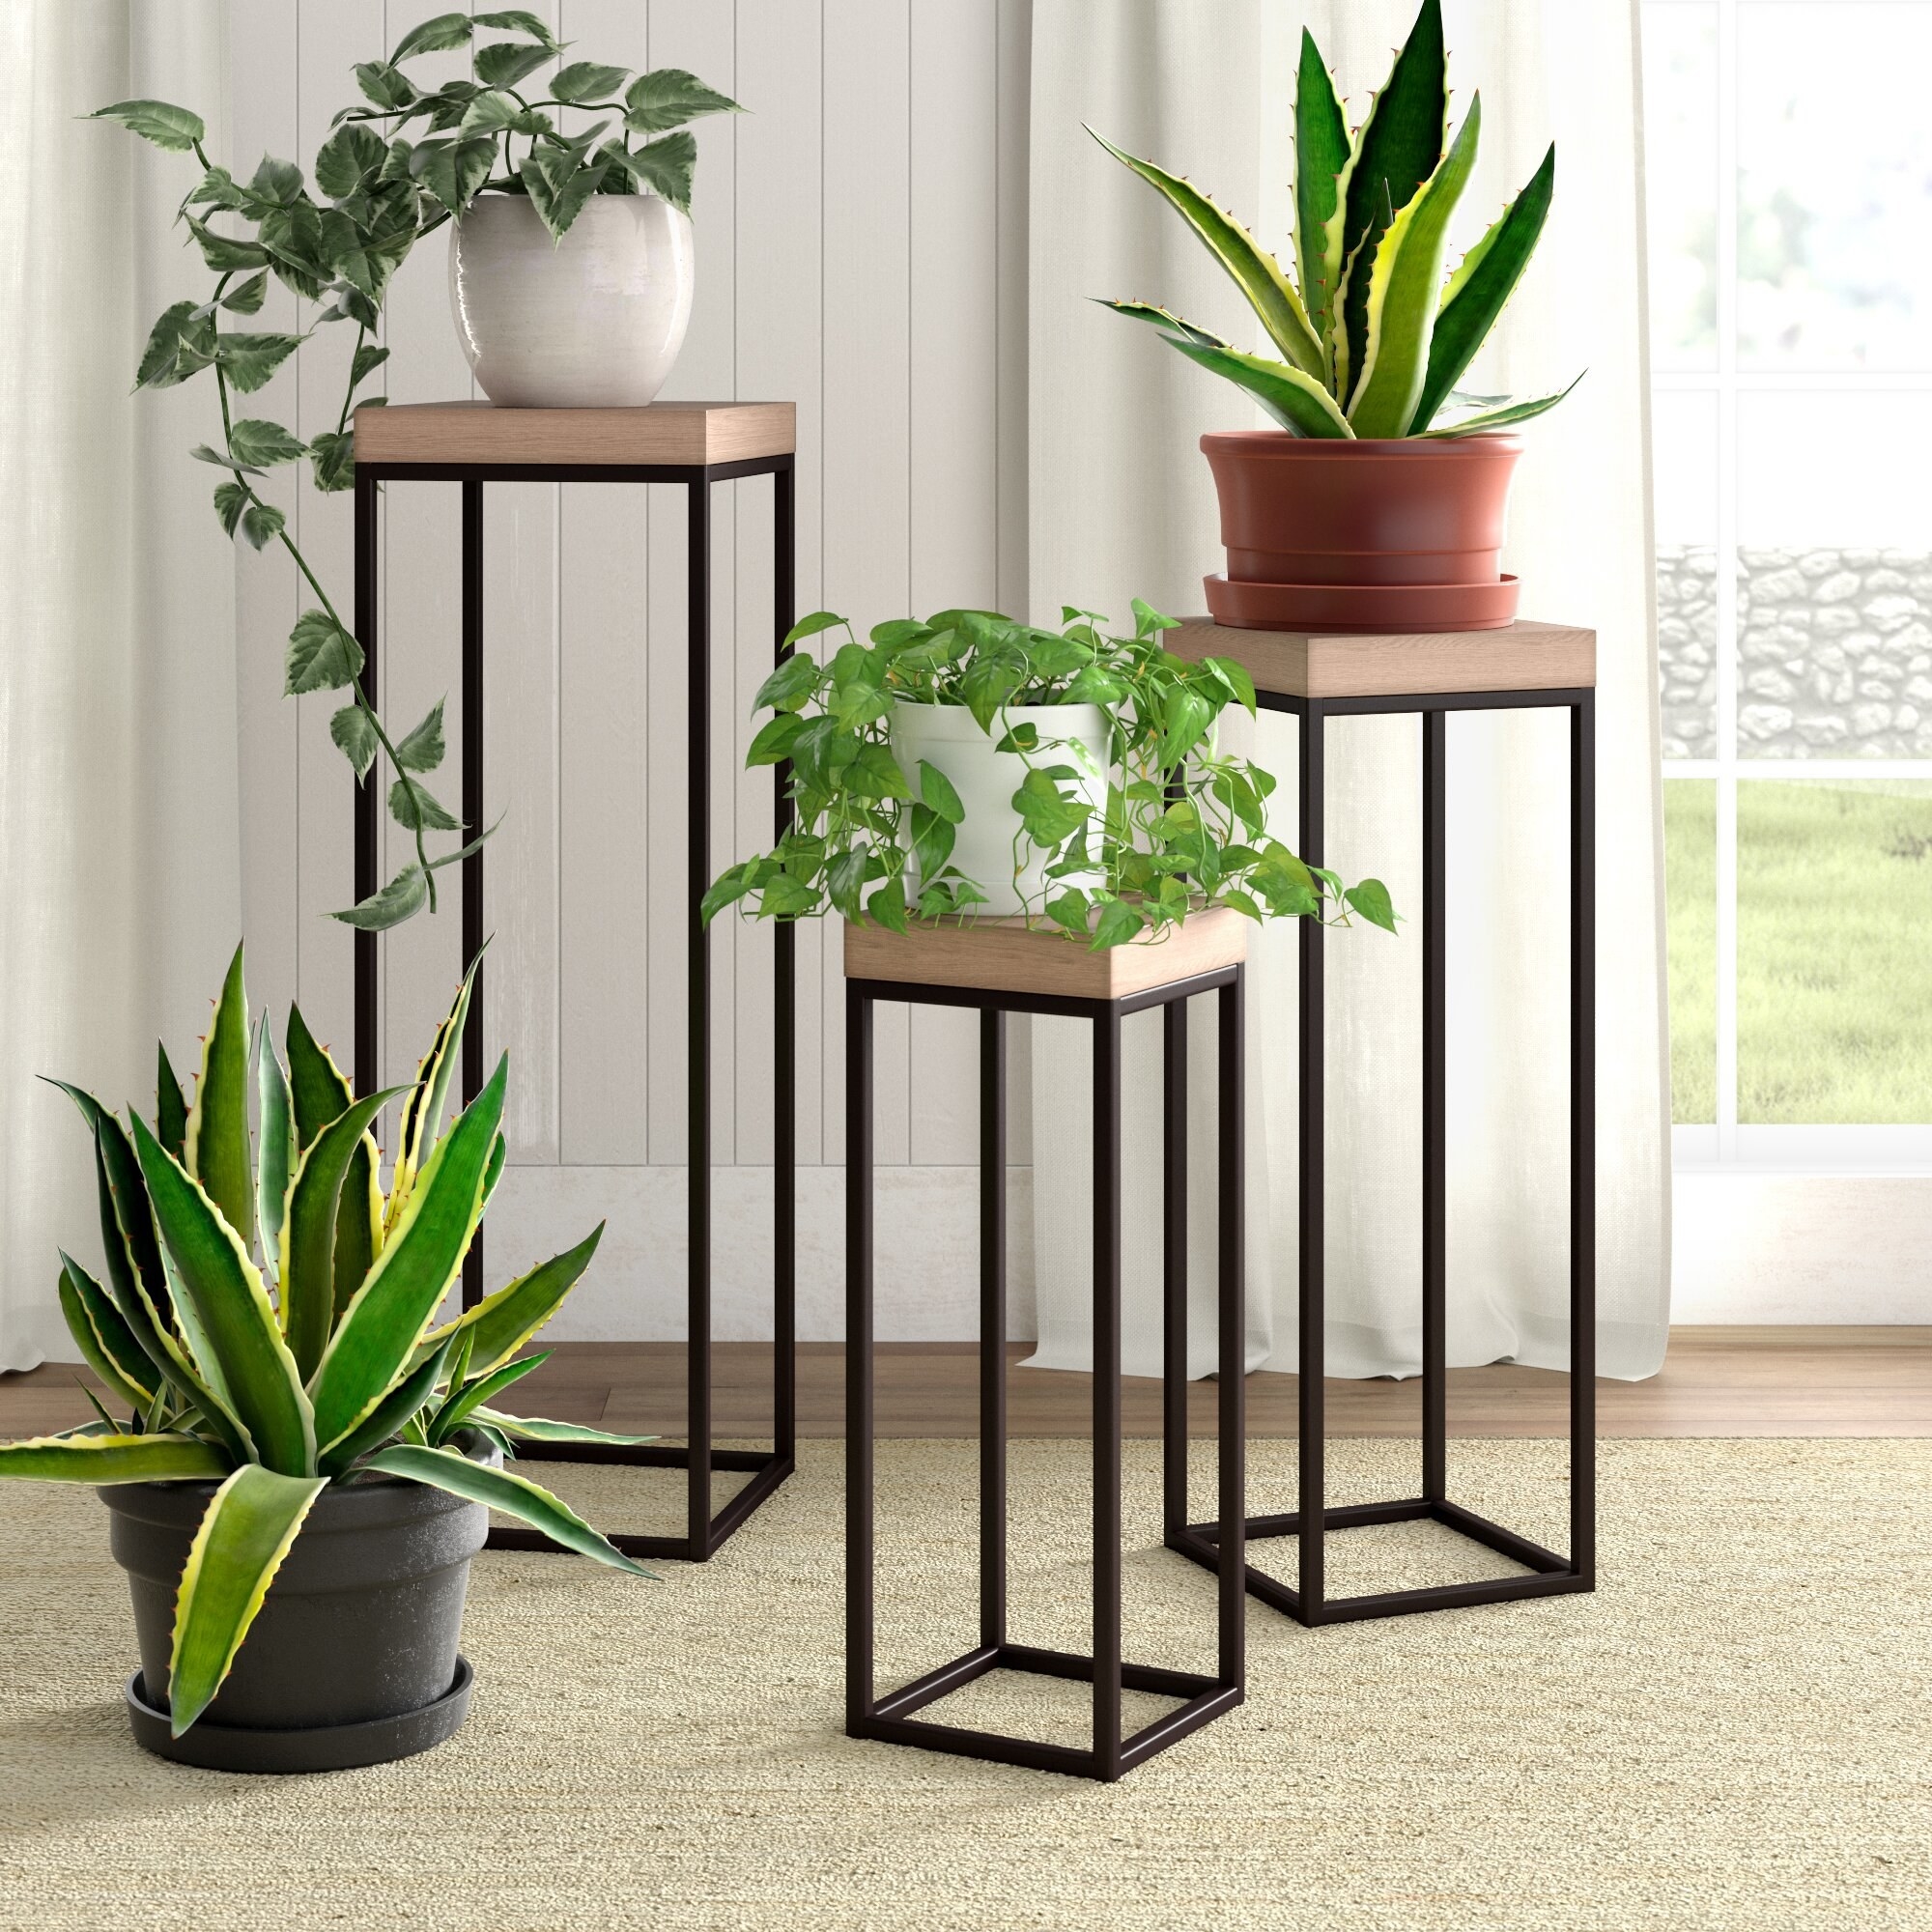 the three plant stands with metal legs and wooden tops